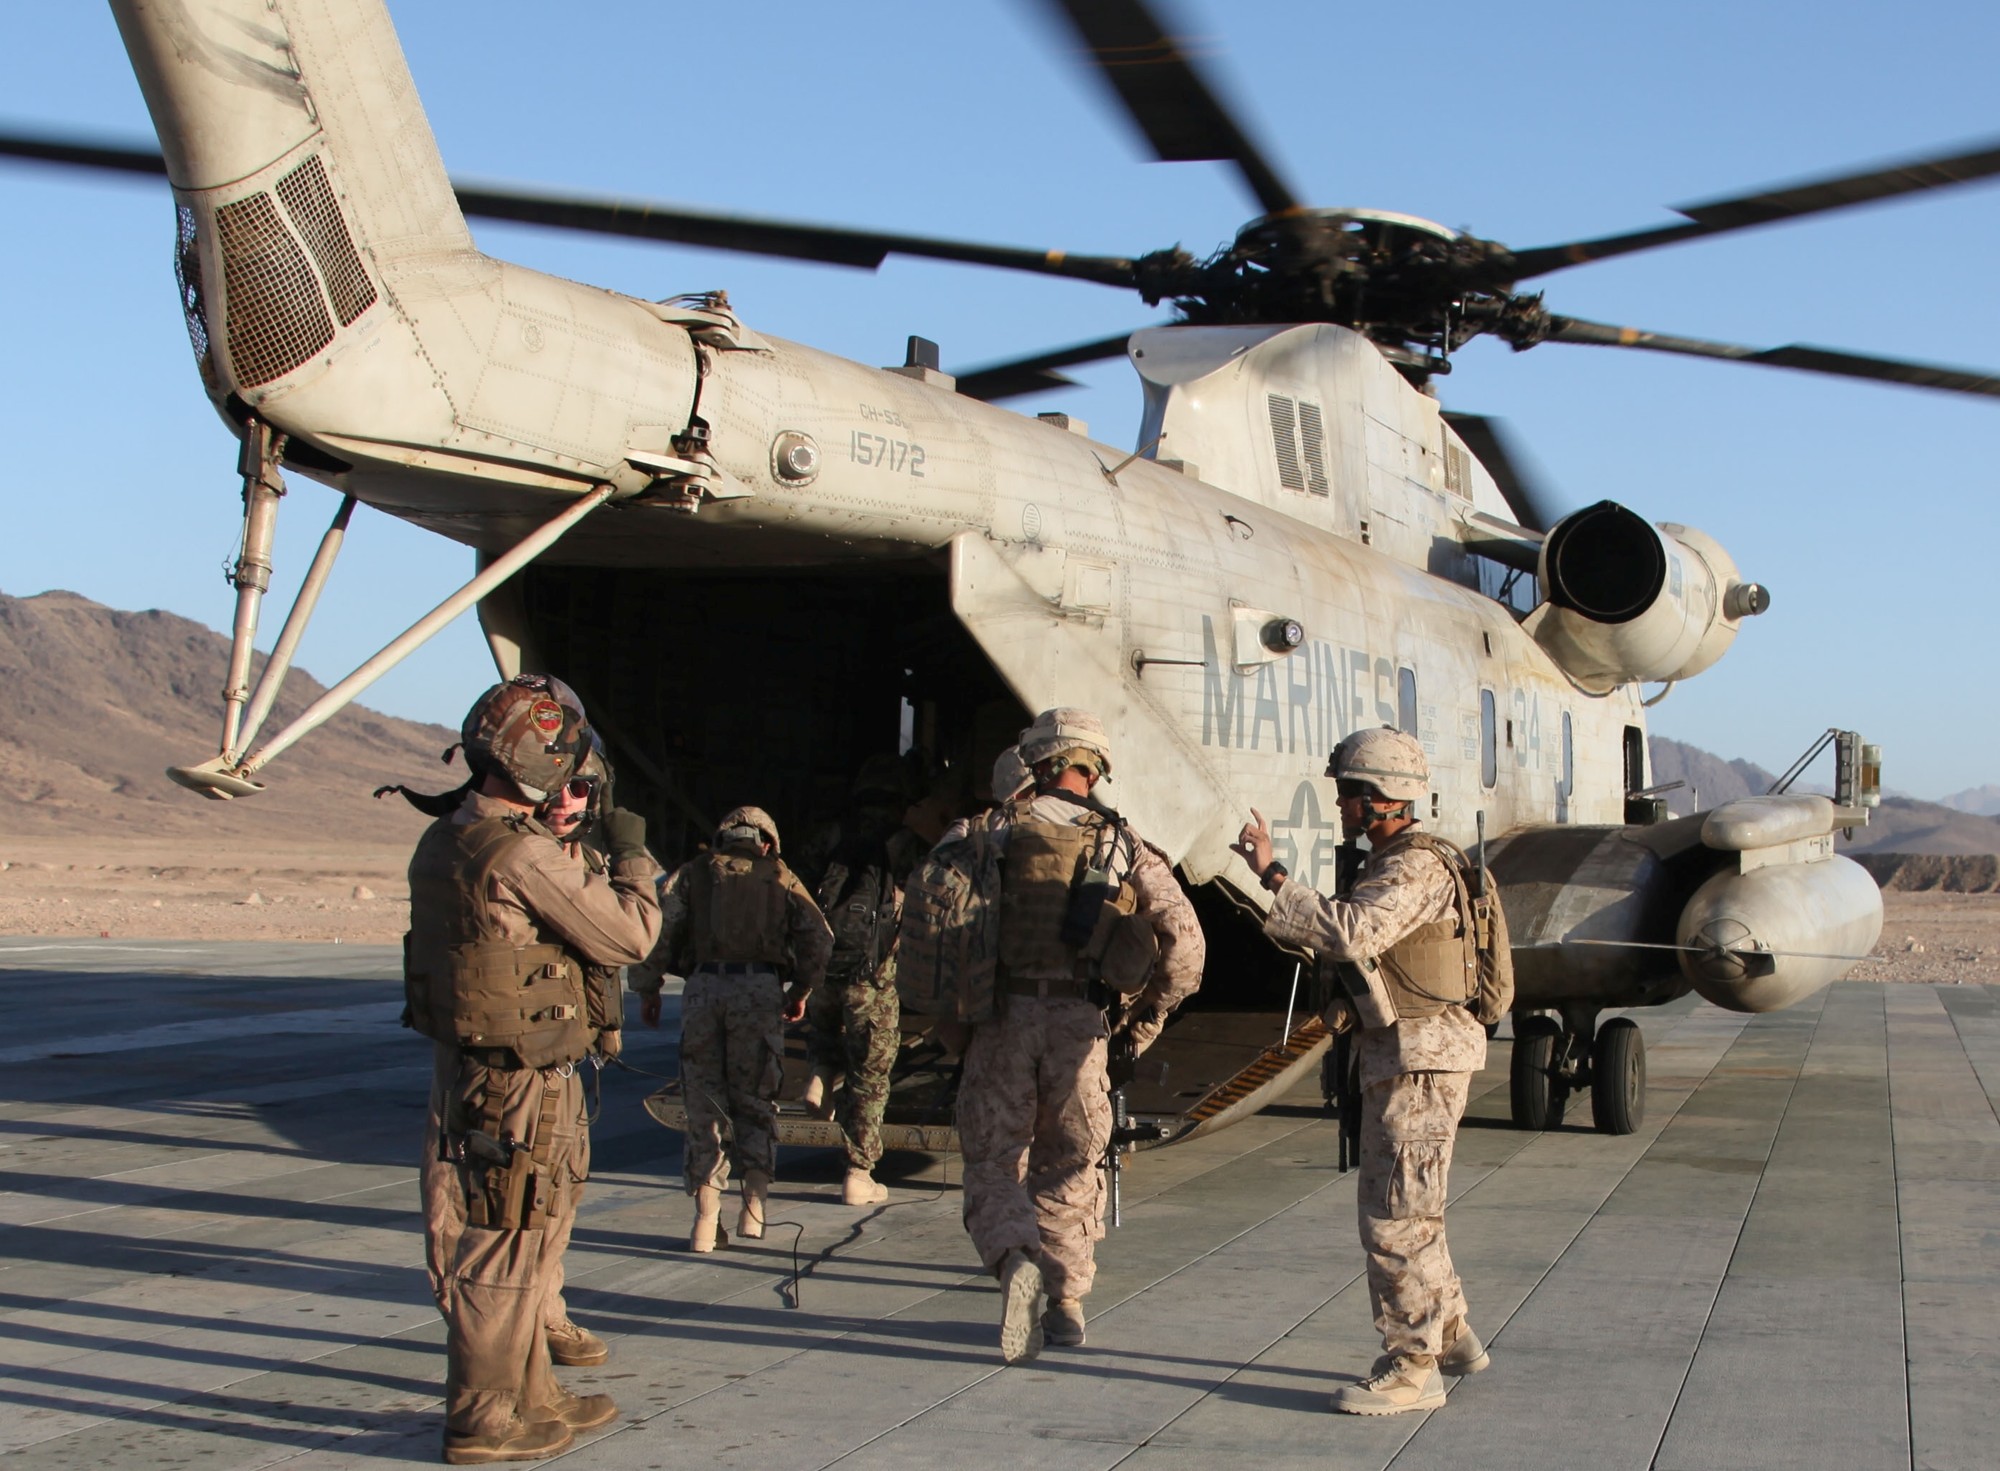 hmh-362 ugly angels marine heavy helicopter squadron usmc sikorsky ch-53d sea stallion 32 helmand province afghanistan